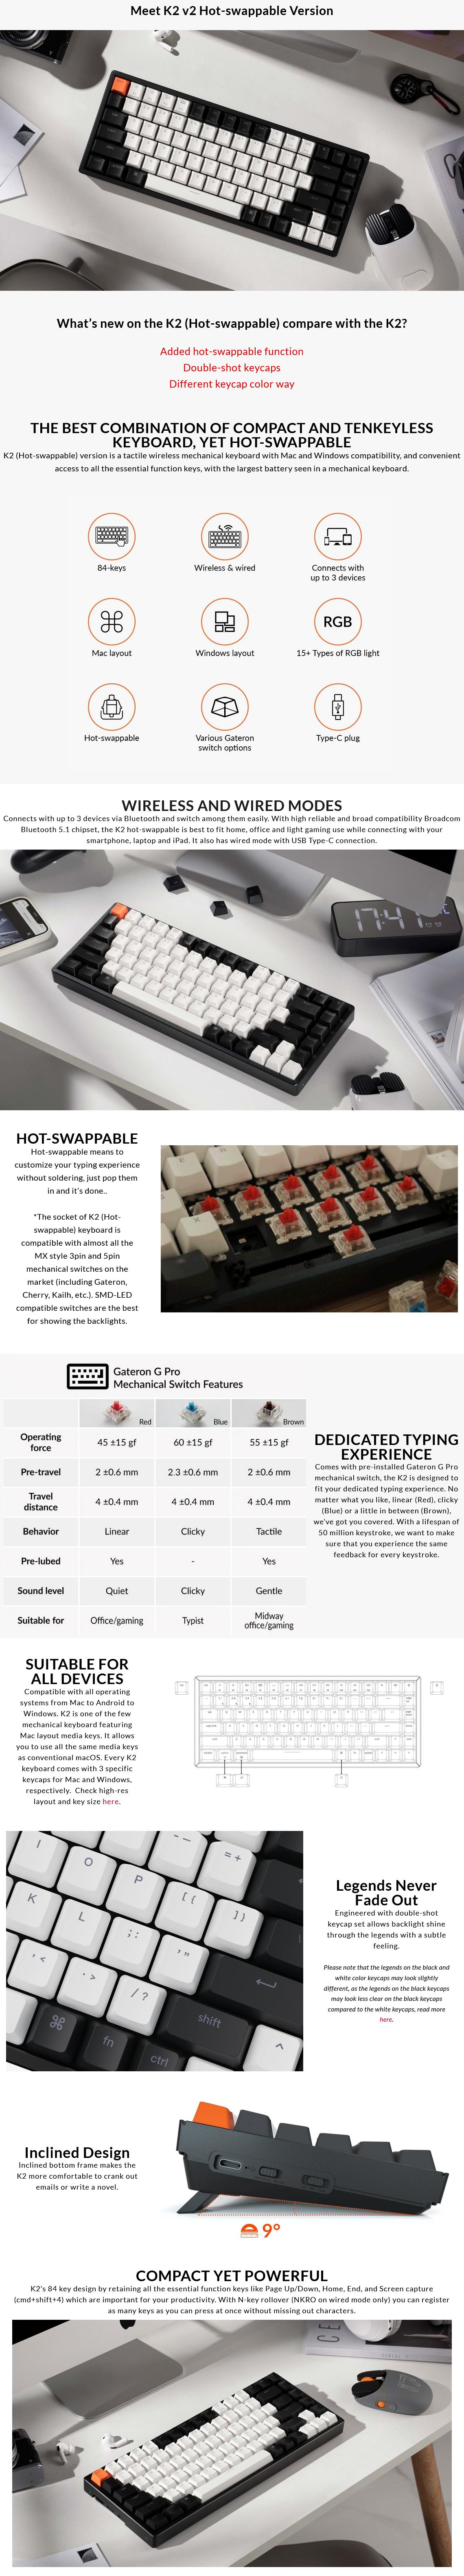 A large marketing image providing additional information about the product Keychron K2 V2 Compact RGB Wireless Mechanical Keyboard (Red Switch) - Additional alt info not provided